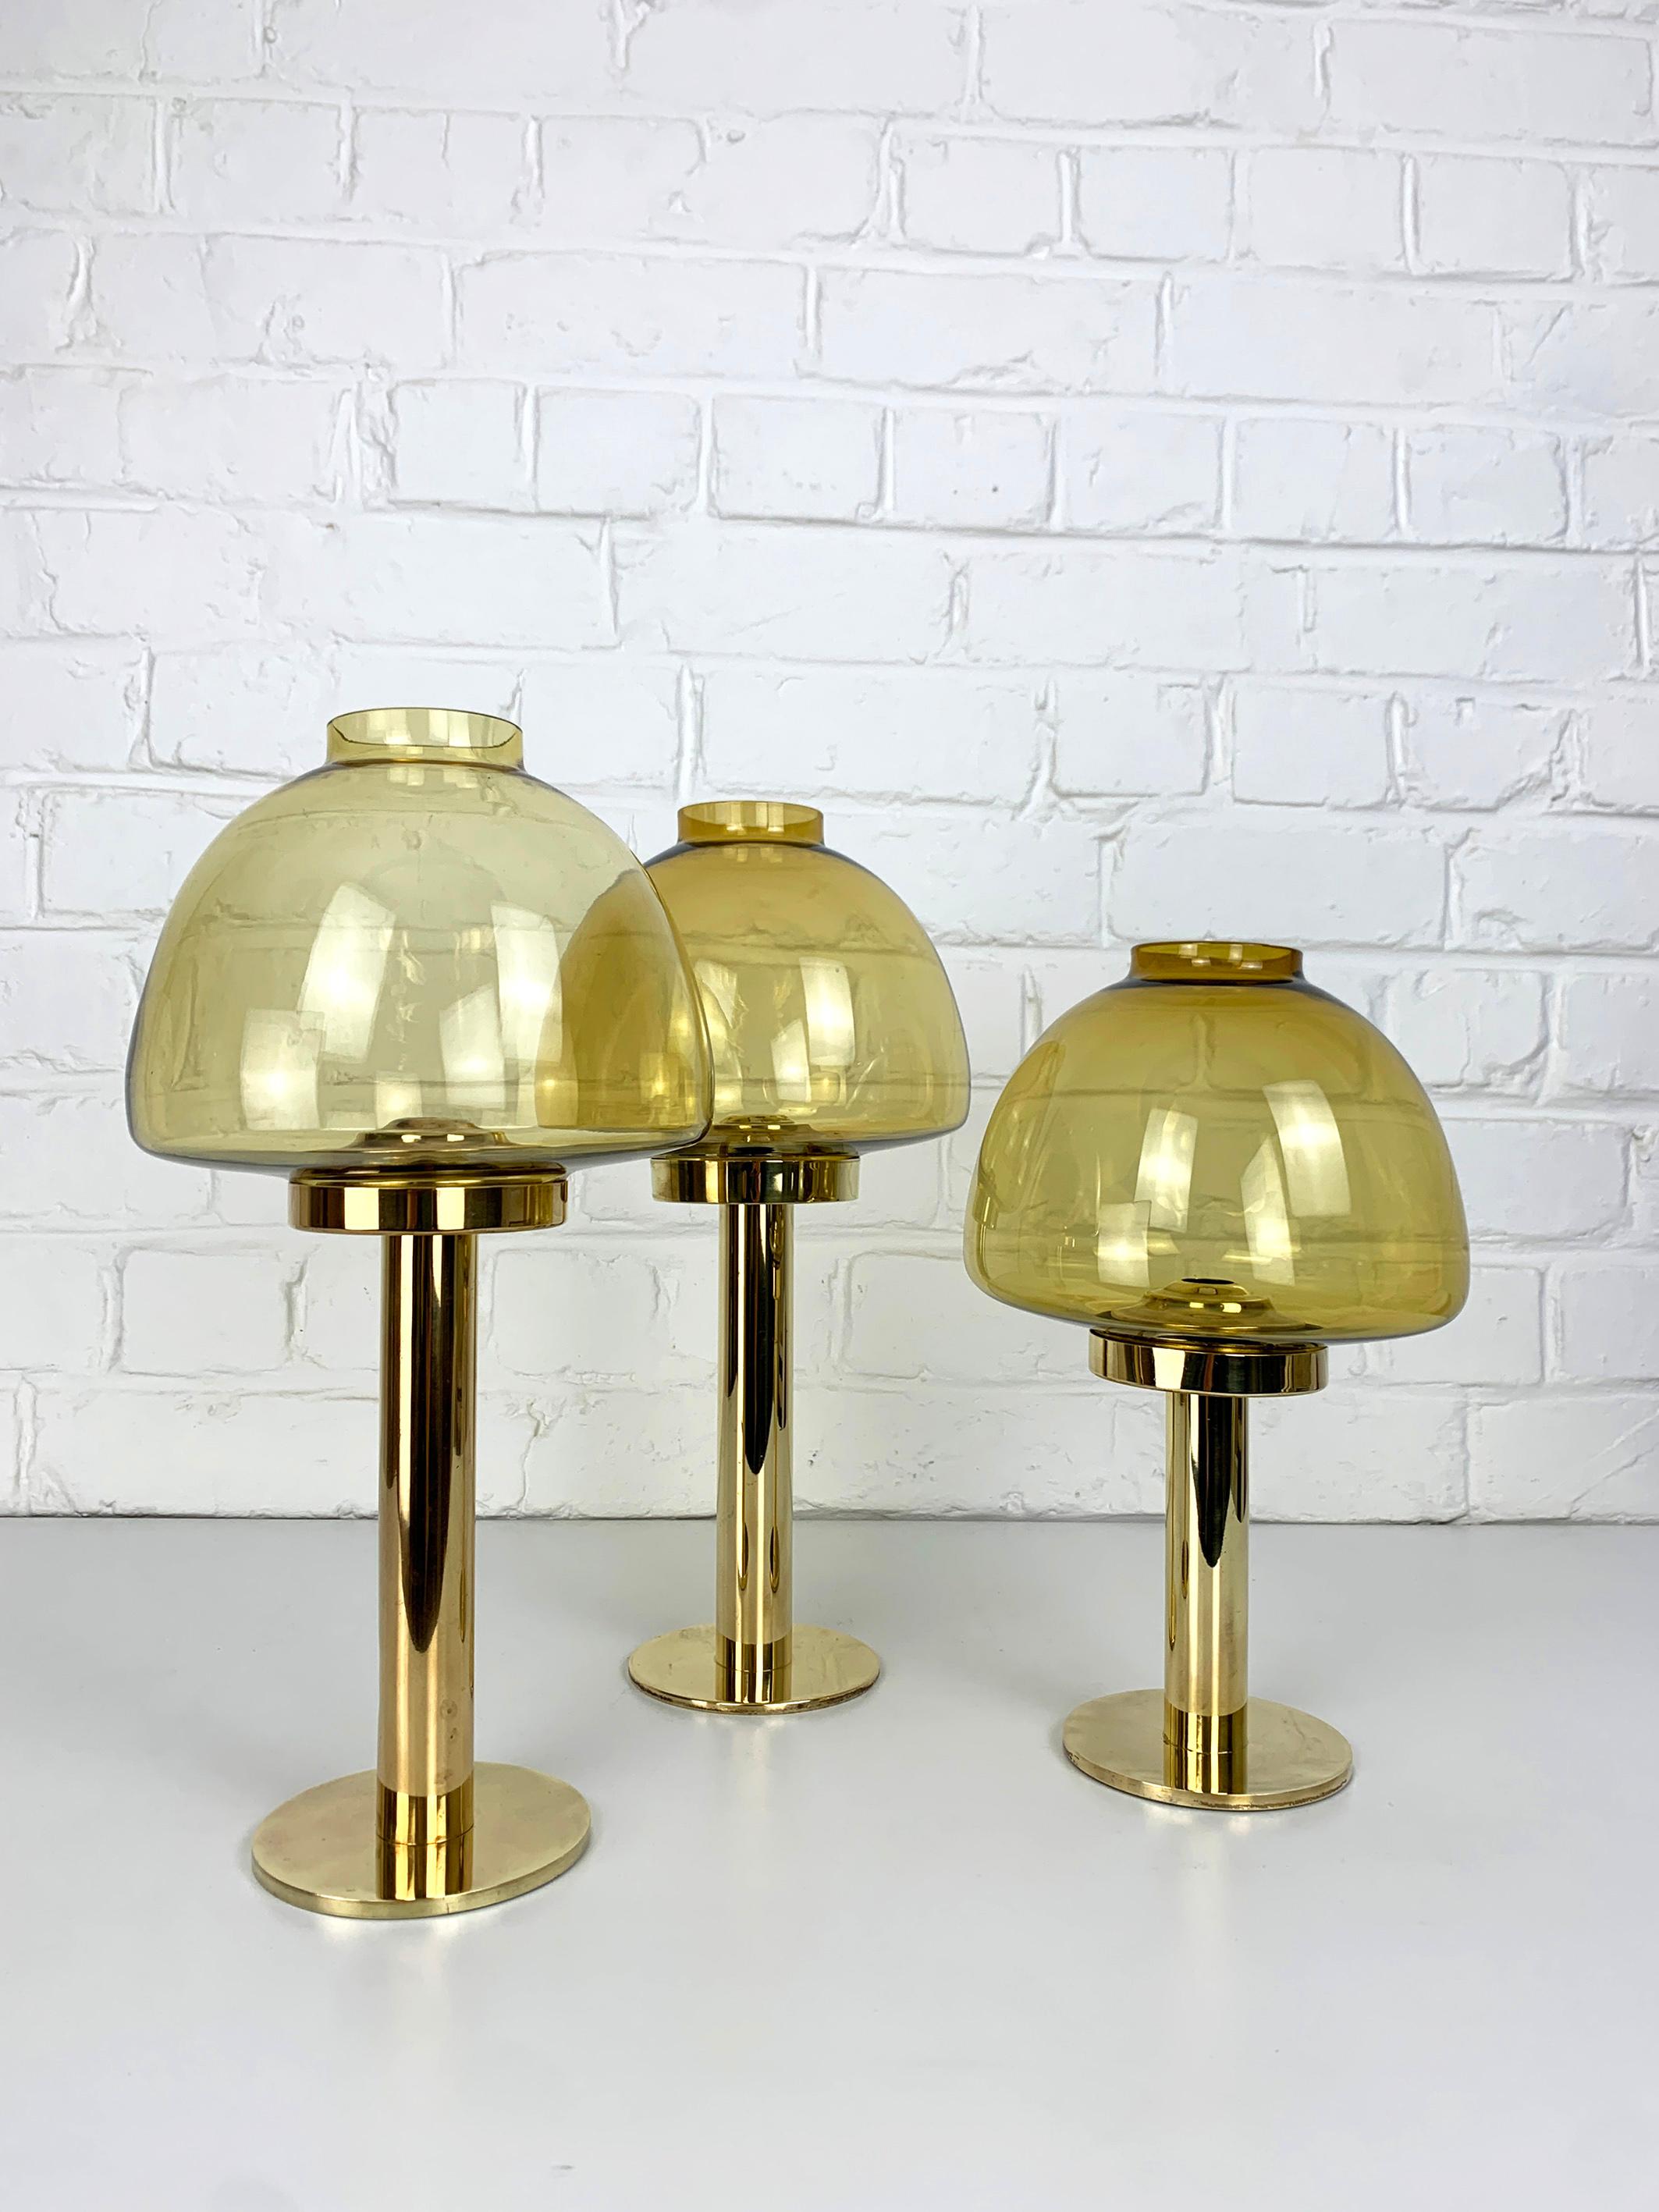 Set of 3 elegant Scandinavian L102/32 Candle Lights in brass and glass.

Nice examples of Hans-Agne Jakobsson's Candle Lanterns with their dark yellow/ochre mouth-blown glass shades. The brass base hides a spring  mechanism that pushes the candle